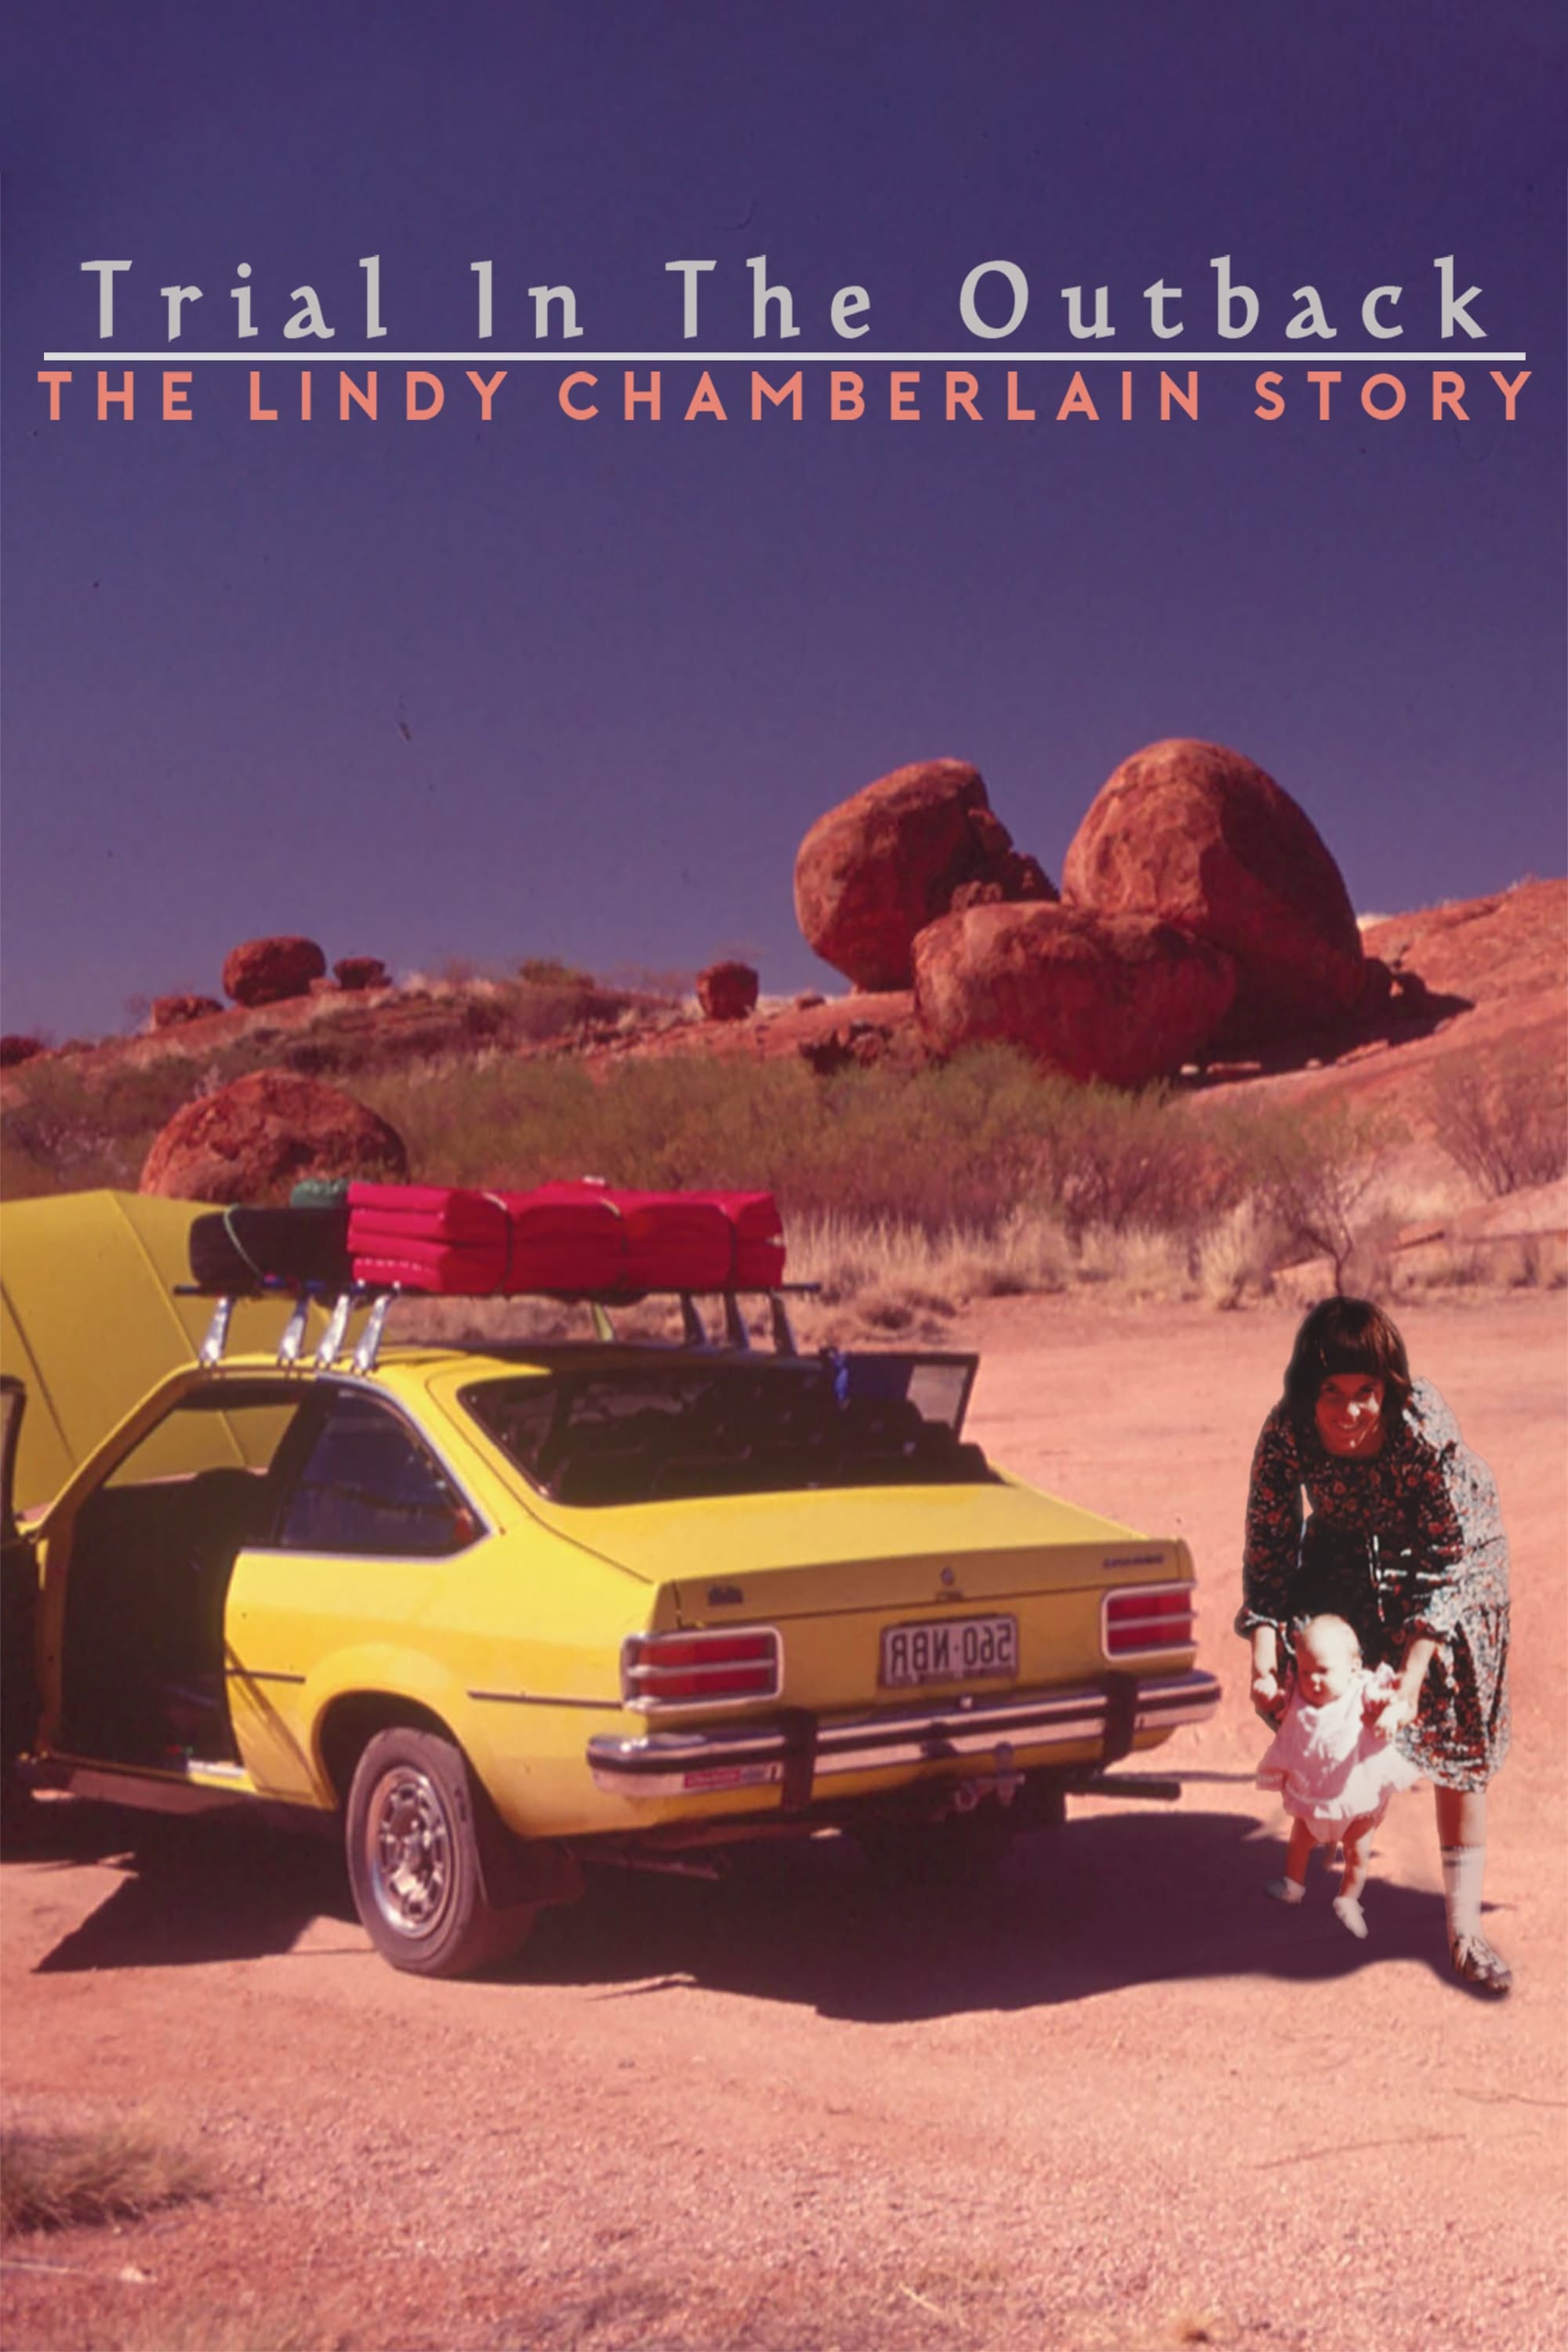 Trial In The Outback: The Lindy Chamberlain Story TV Shows About Trial